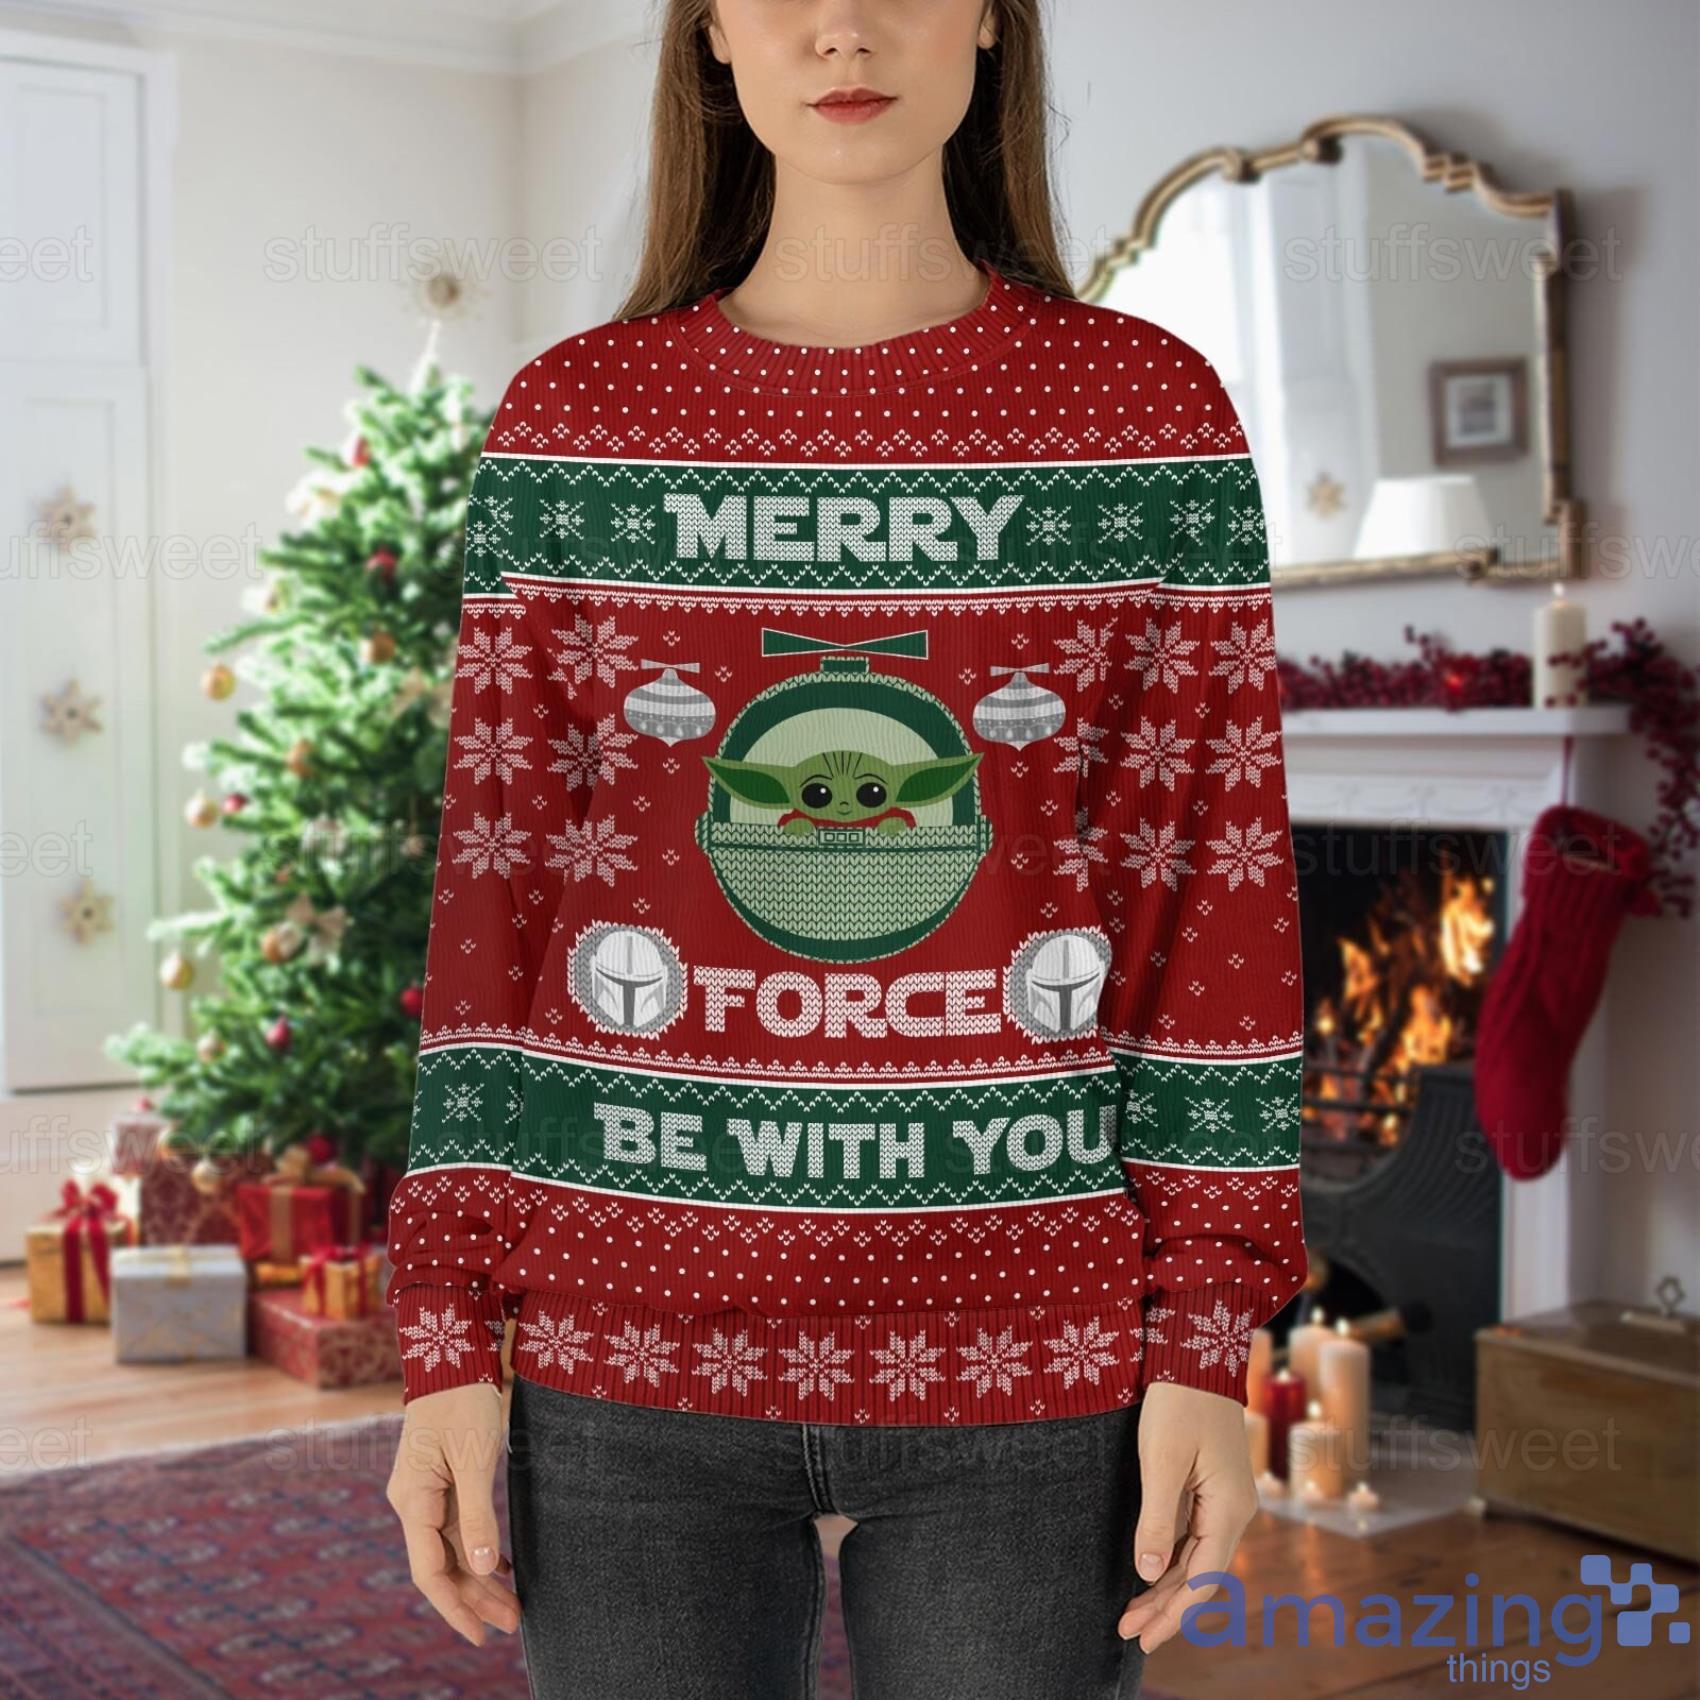 Merry Knitting Xmas You Red The Ugly Pattern Sweater Be Mandalorian Yoda 3D Baby Force Christmas With